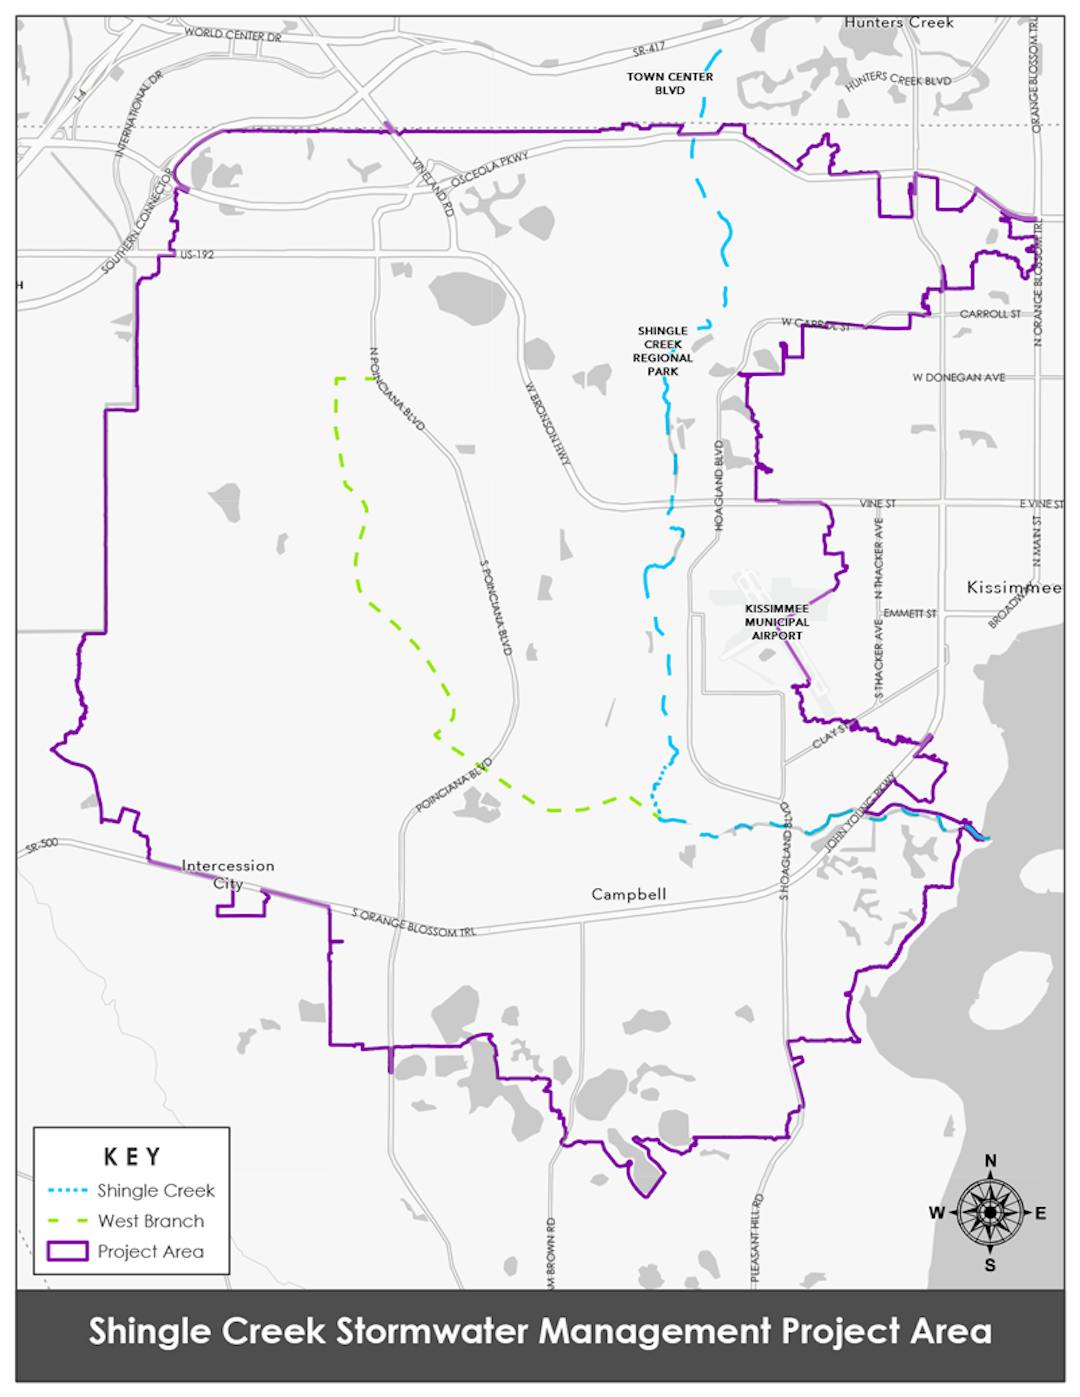 Shingle Creek Stormwater Management Project Area